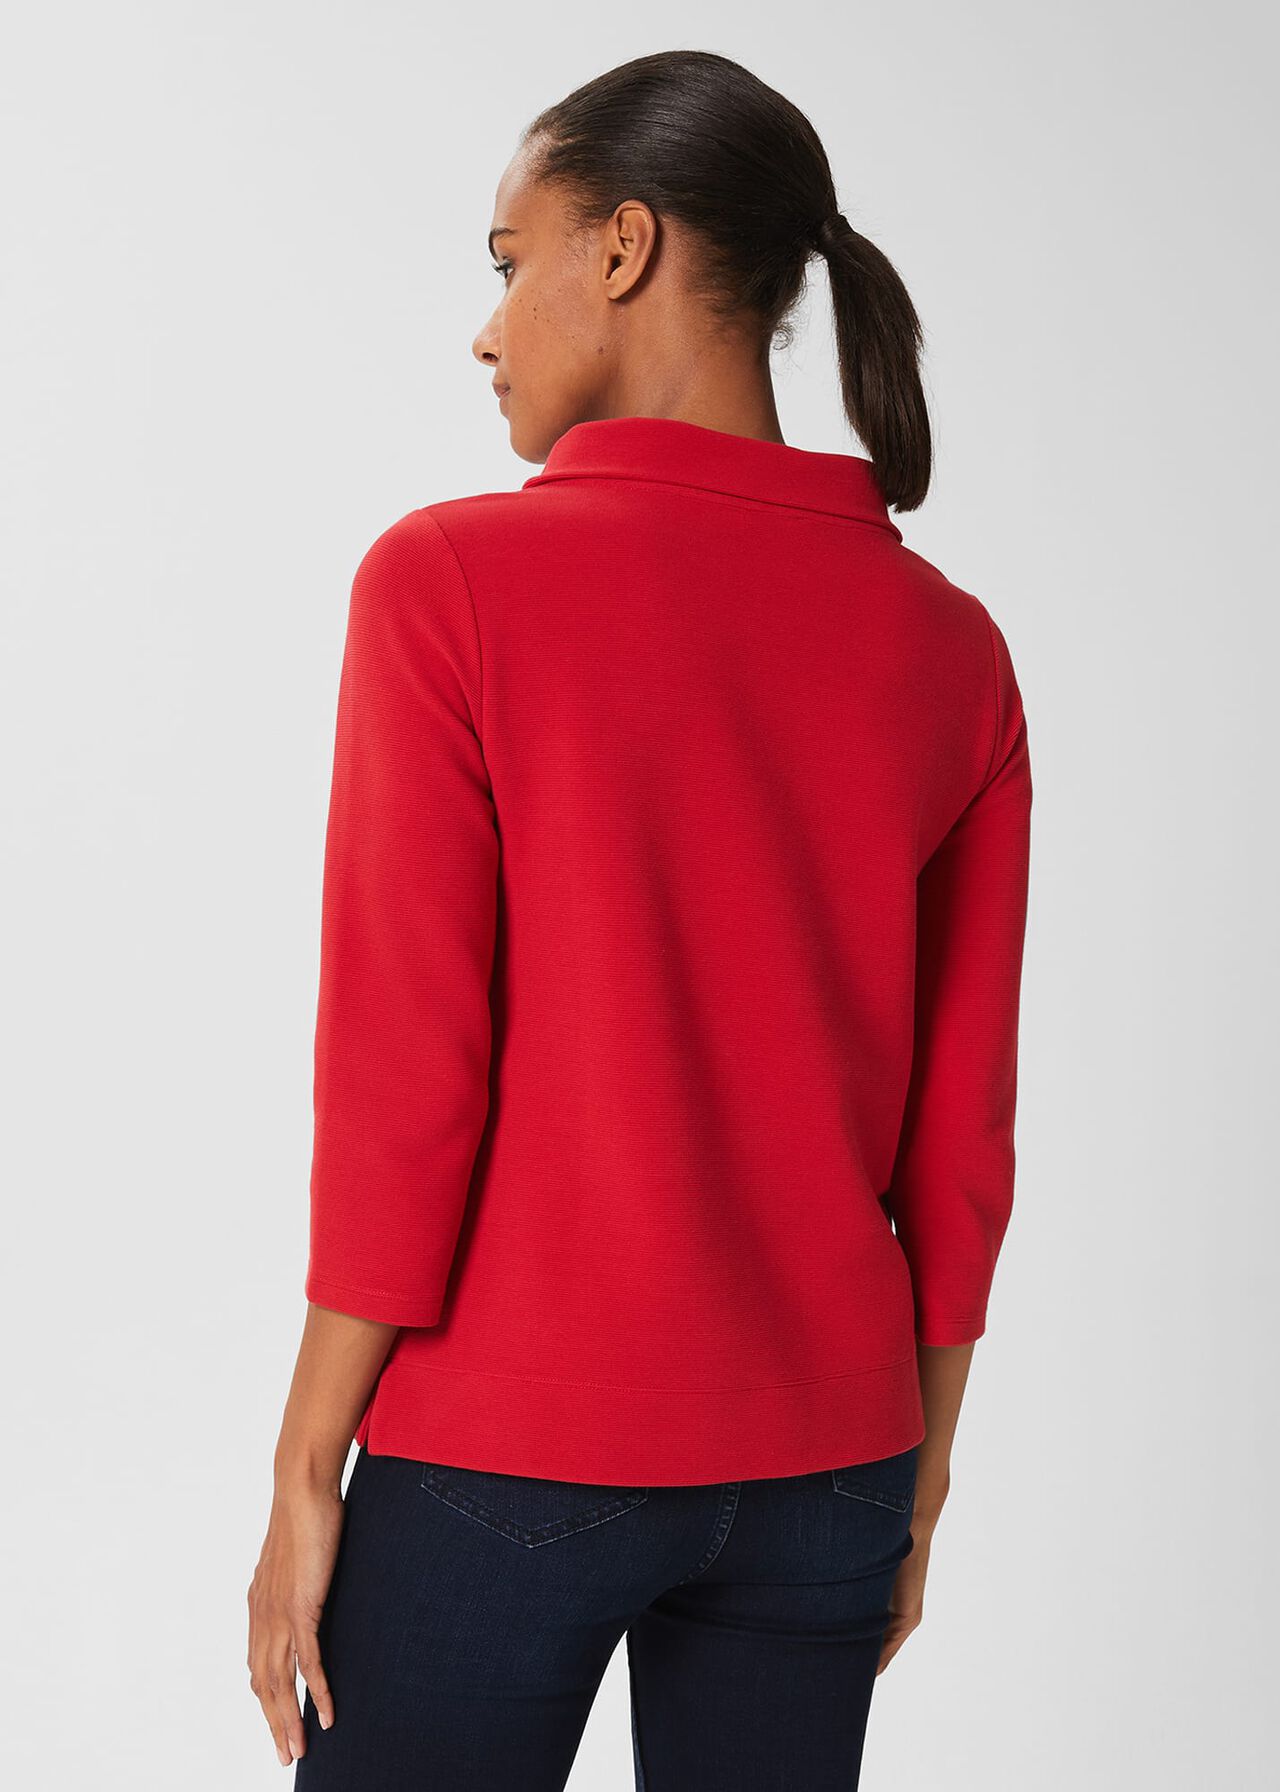 Betsy Textured Top With Cotton , Cherry Red, hi-res